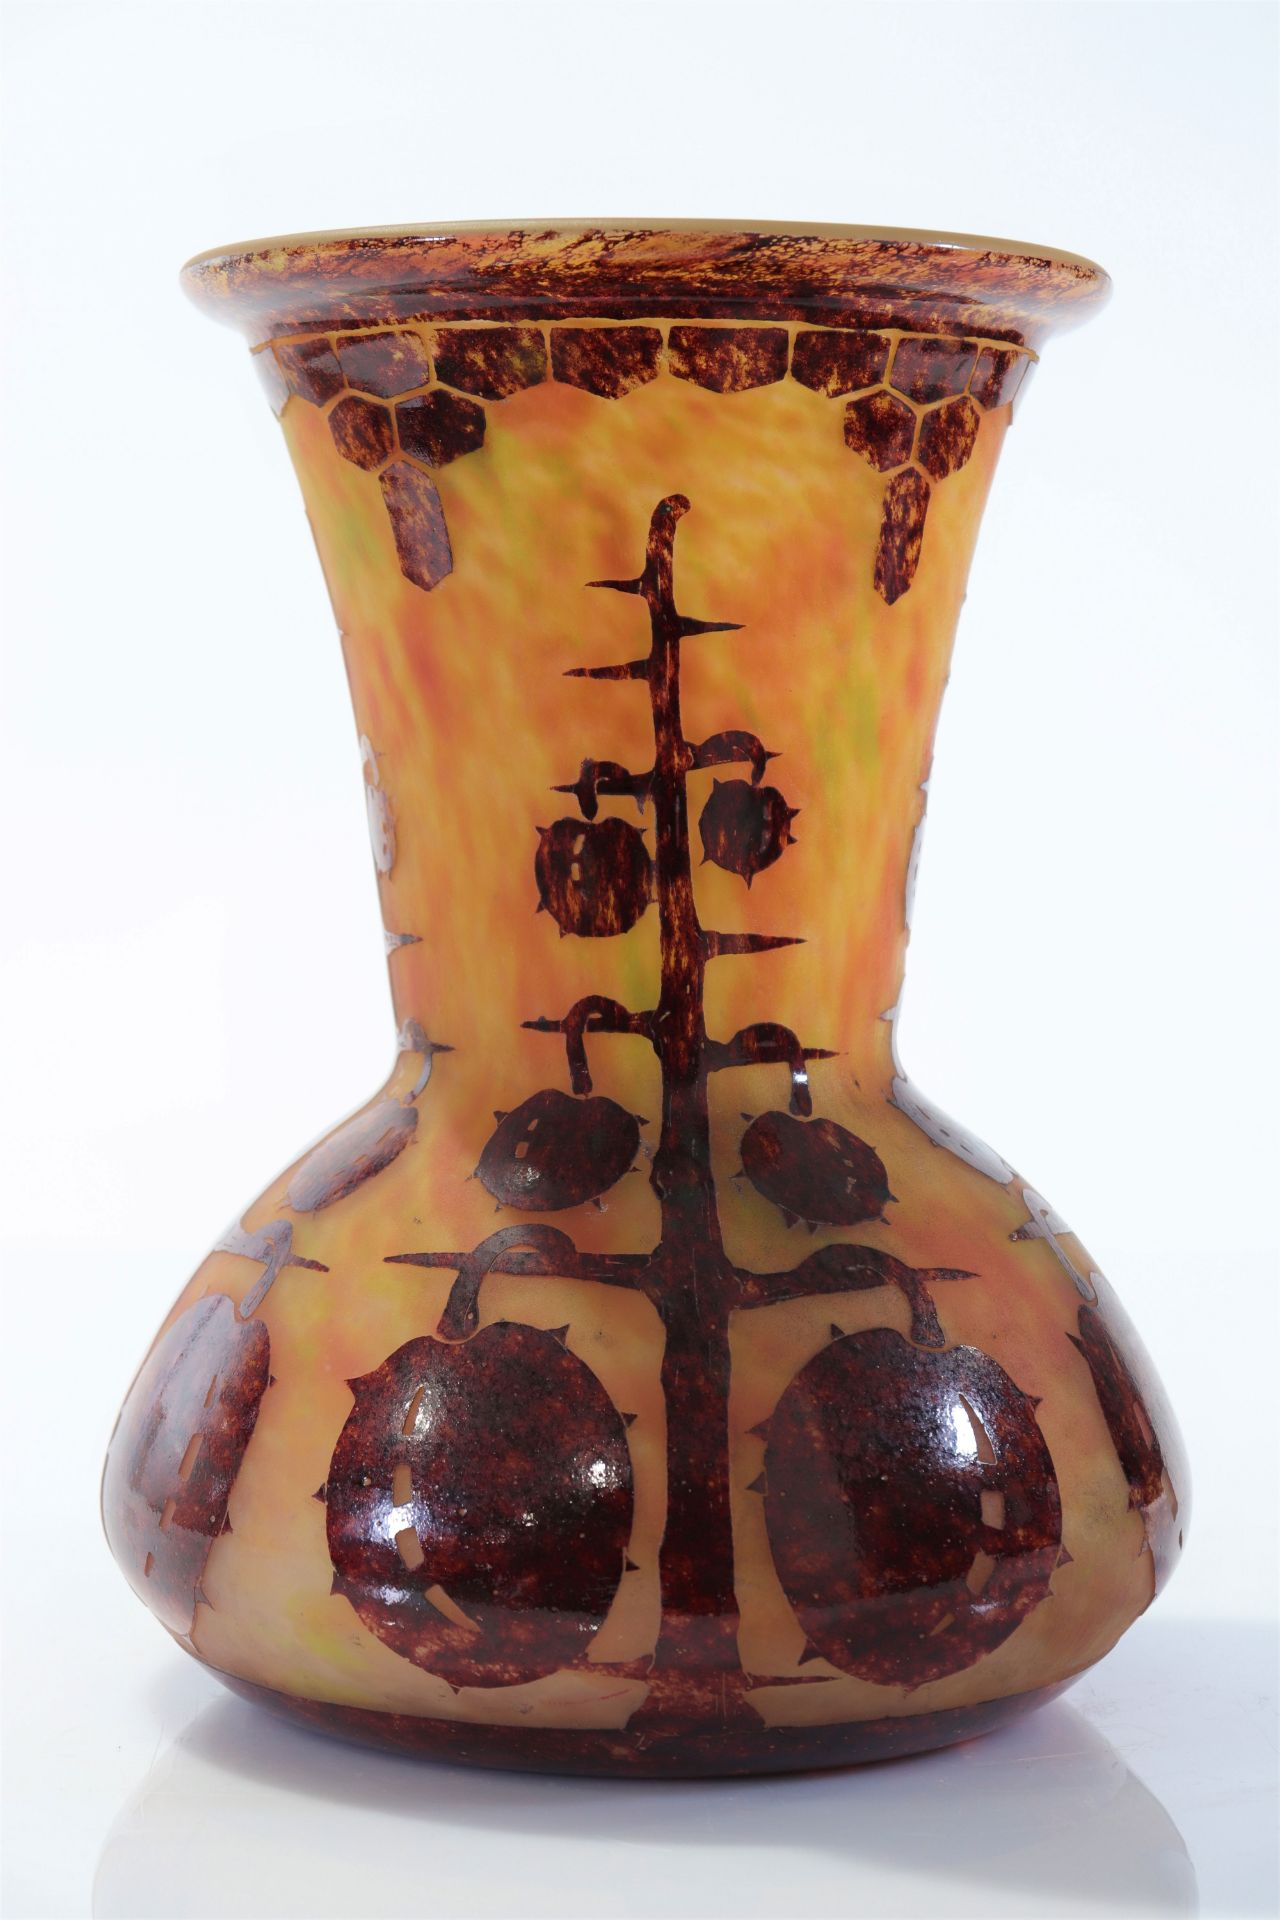 The imposing French glass vase with maroniers